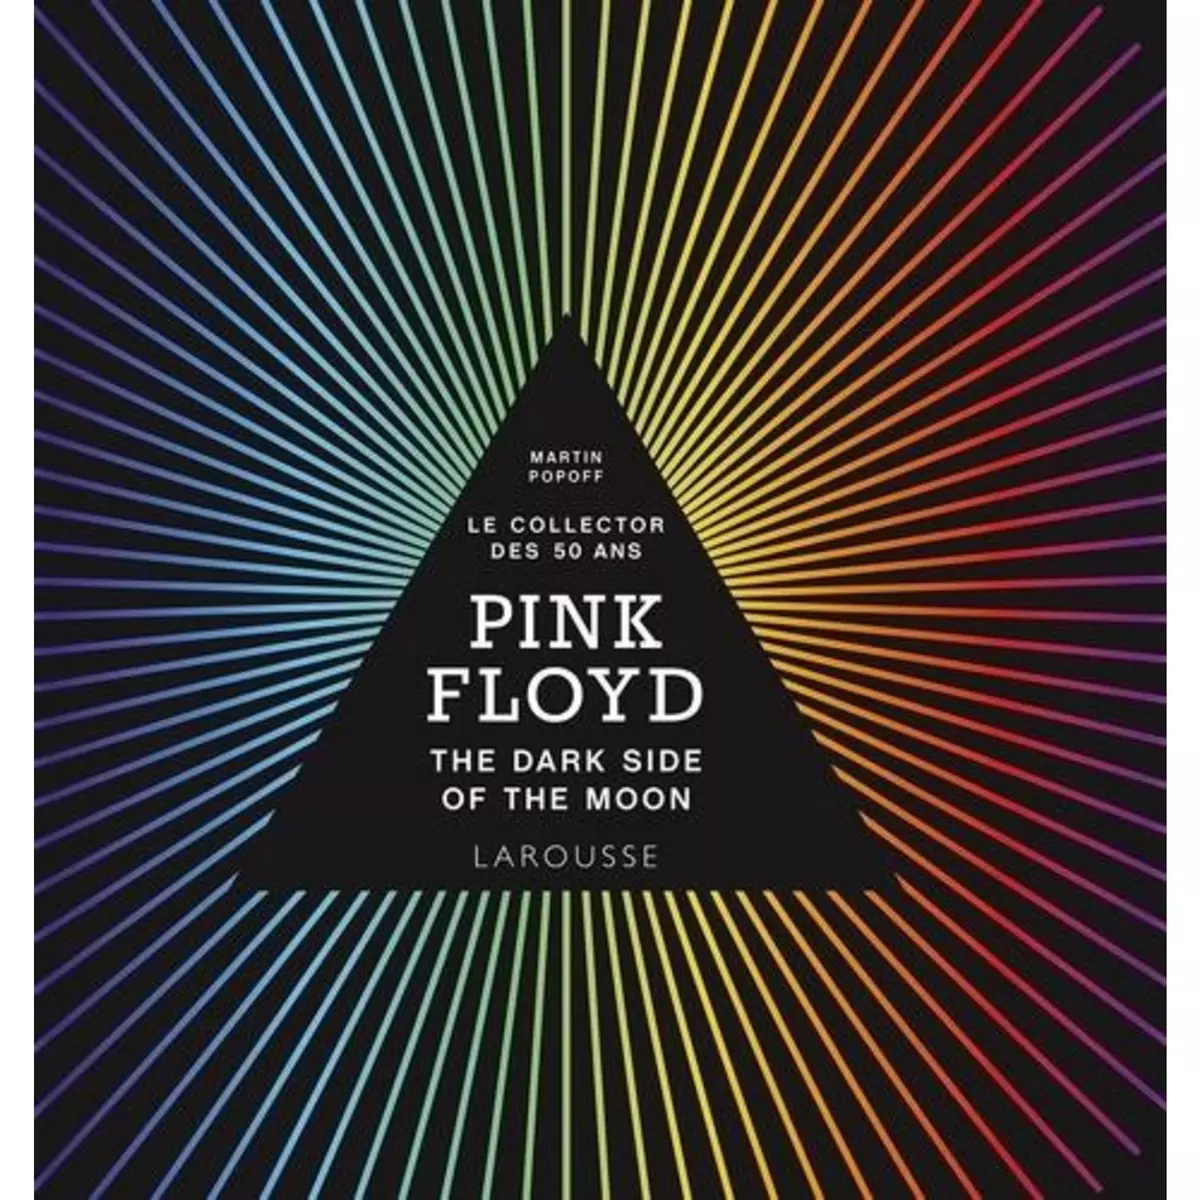  PINK FLOYD - THE DARK SIDE OF THE MOON. LE COLLECTOR DES 50 ANS, Popoff Martin